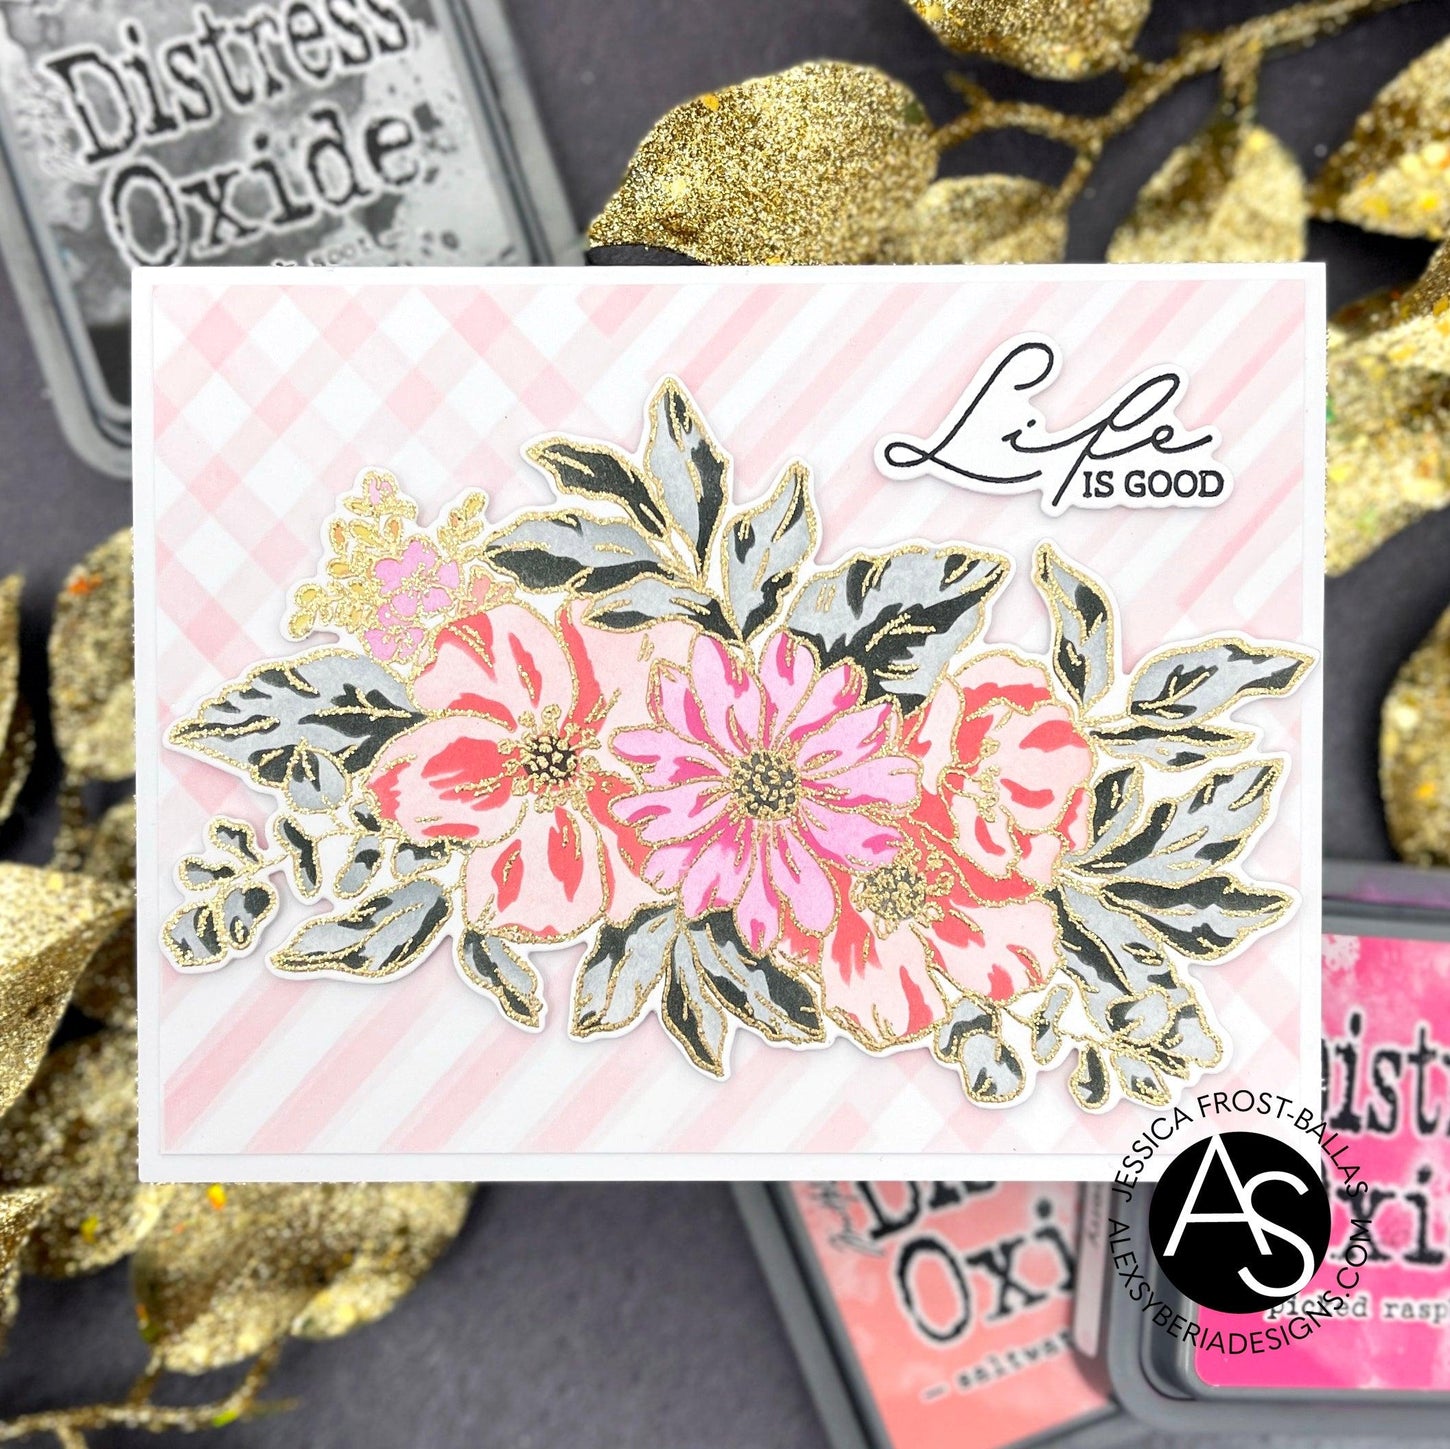 alex-syberia-designs-modern-stripes-stencils-cascards-cardmaking-ideas-floral-layering-stamps-tutorials-heat-embossing-wow-distress-oxide